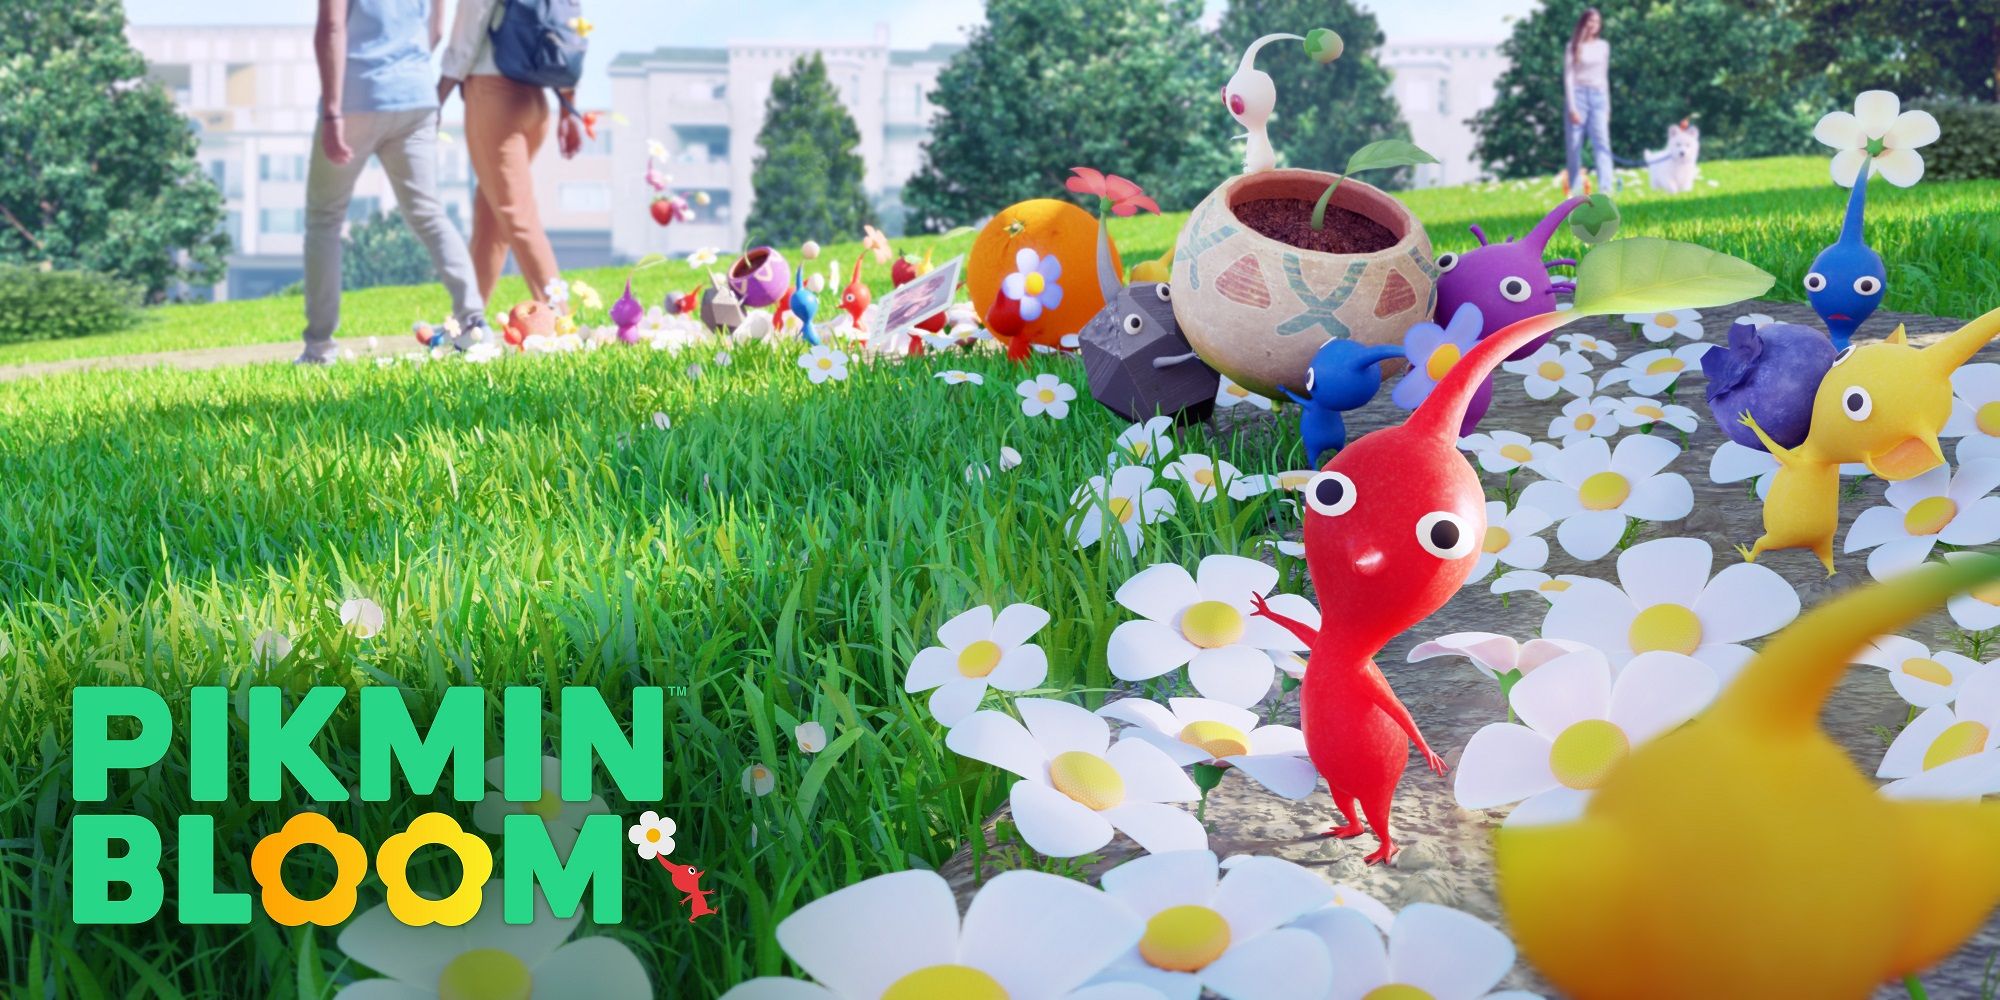 Sharing A Community Day With Pokemon Go Could Kill Pikmin Bloom